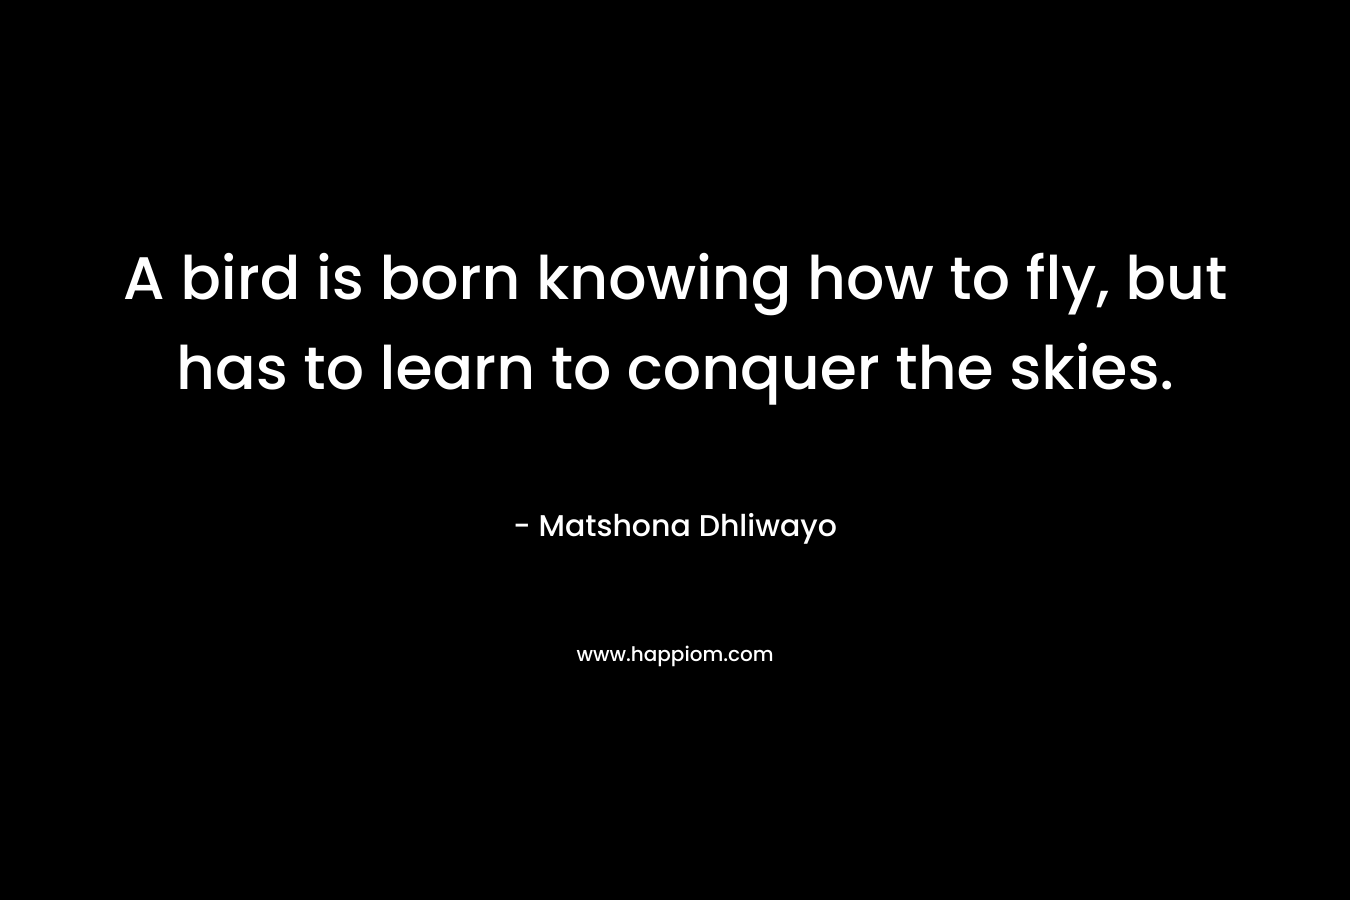 A bird is born knowing how to fly, but has to learn to conquer the skies.